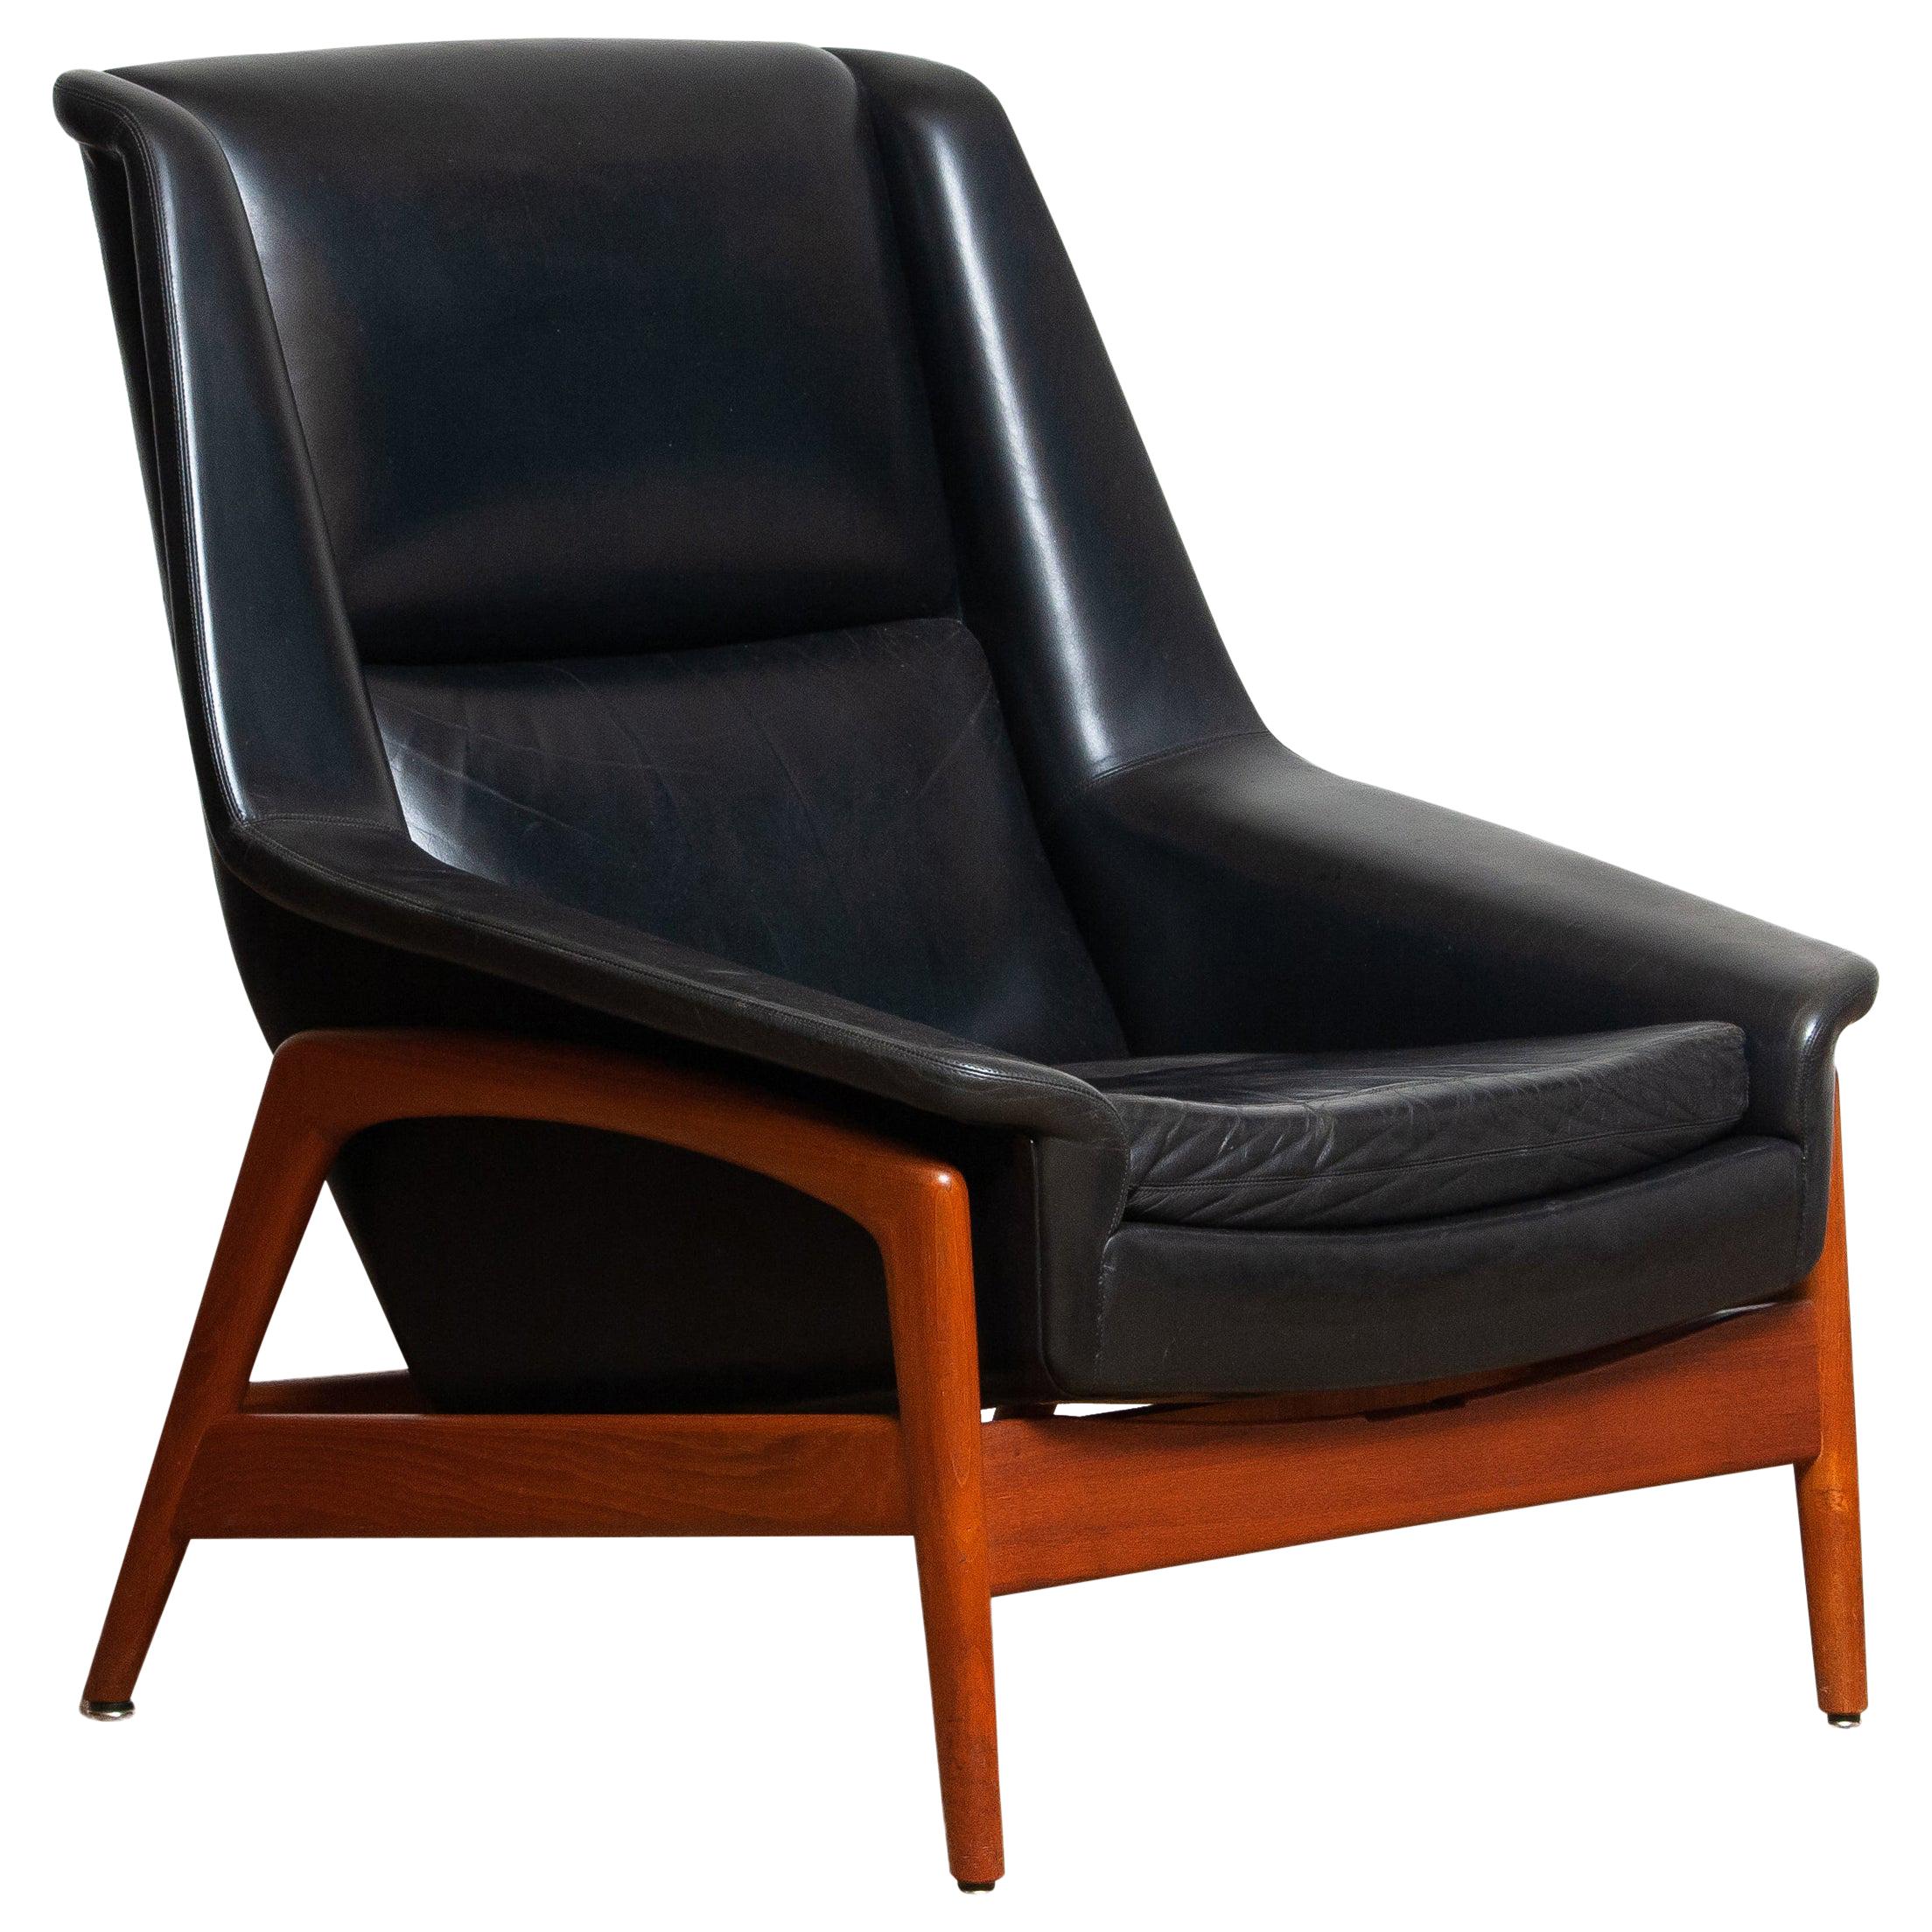 Stunning easy or lounge chair in teak and upholstered in black leather by Folke Ohlsson for DUX Sweden,
Model; Profil
Overall in good condition and note that we have two black leather Profil chairs in our gallery.